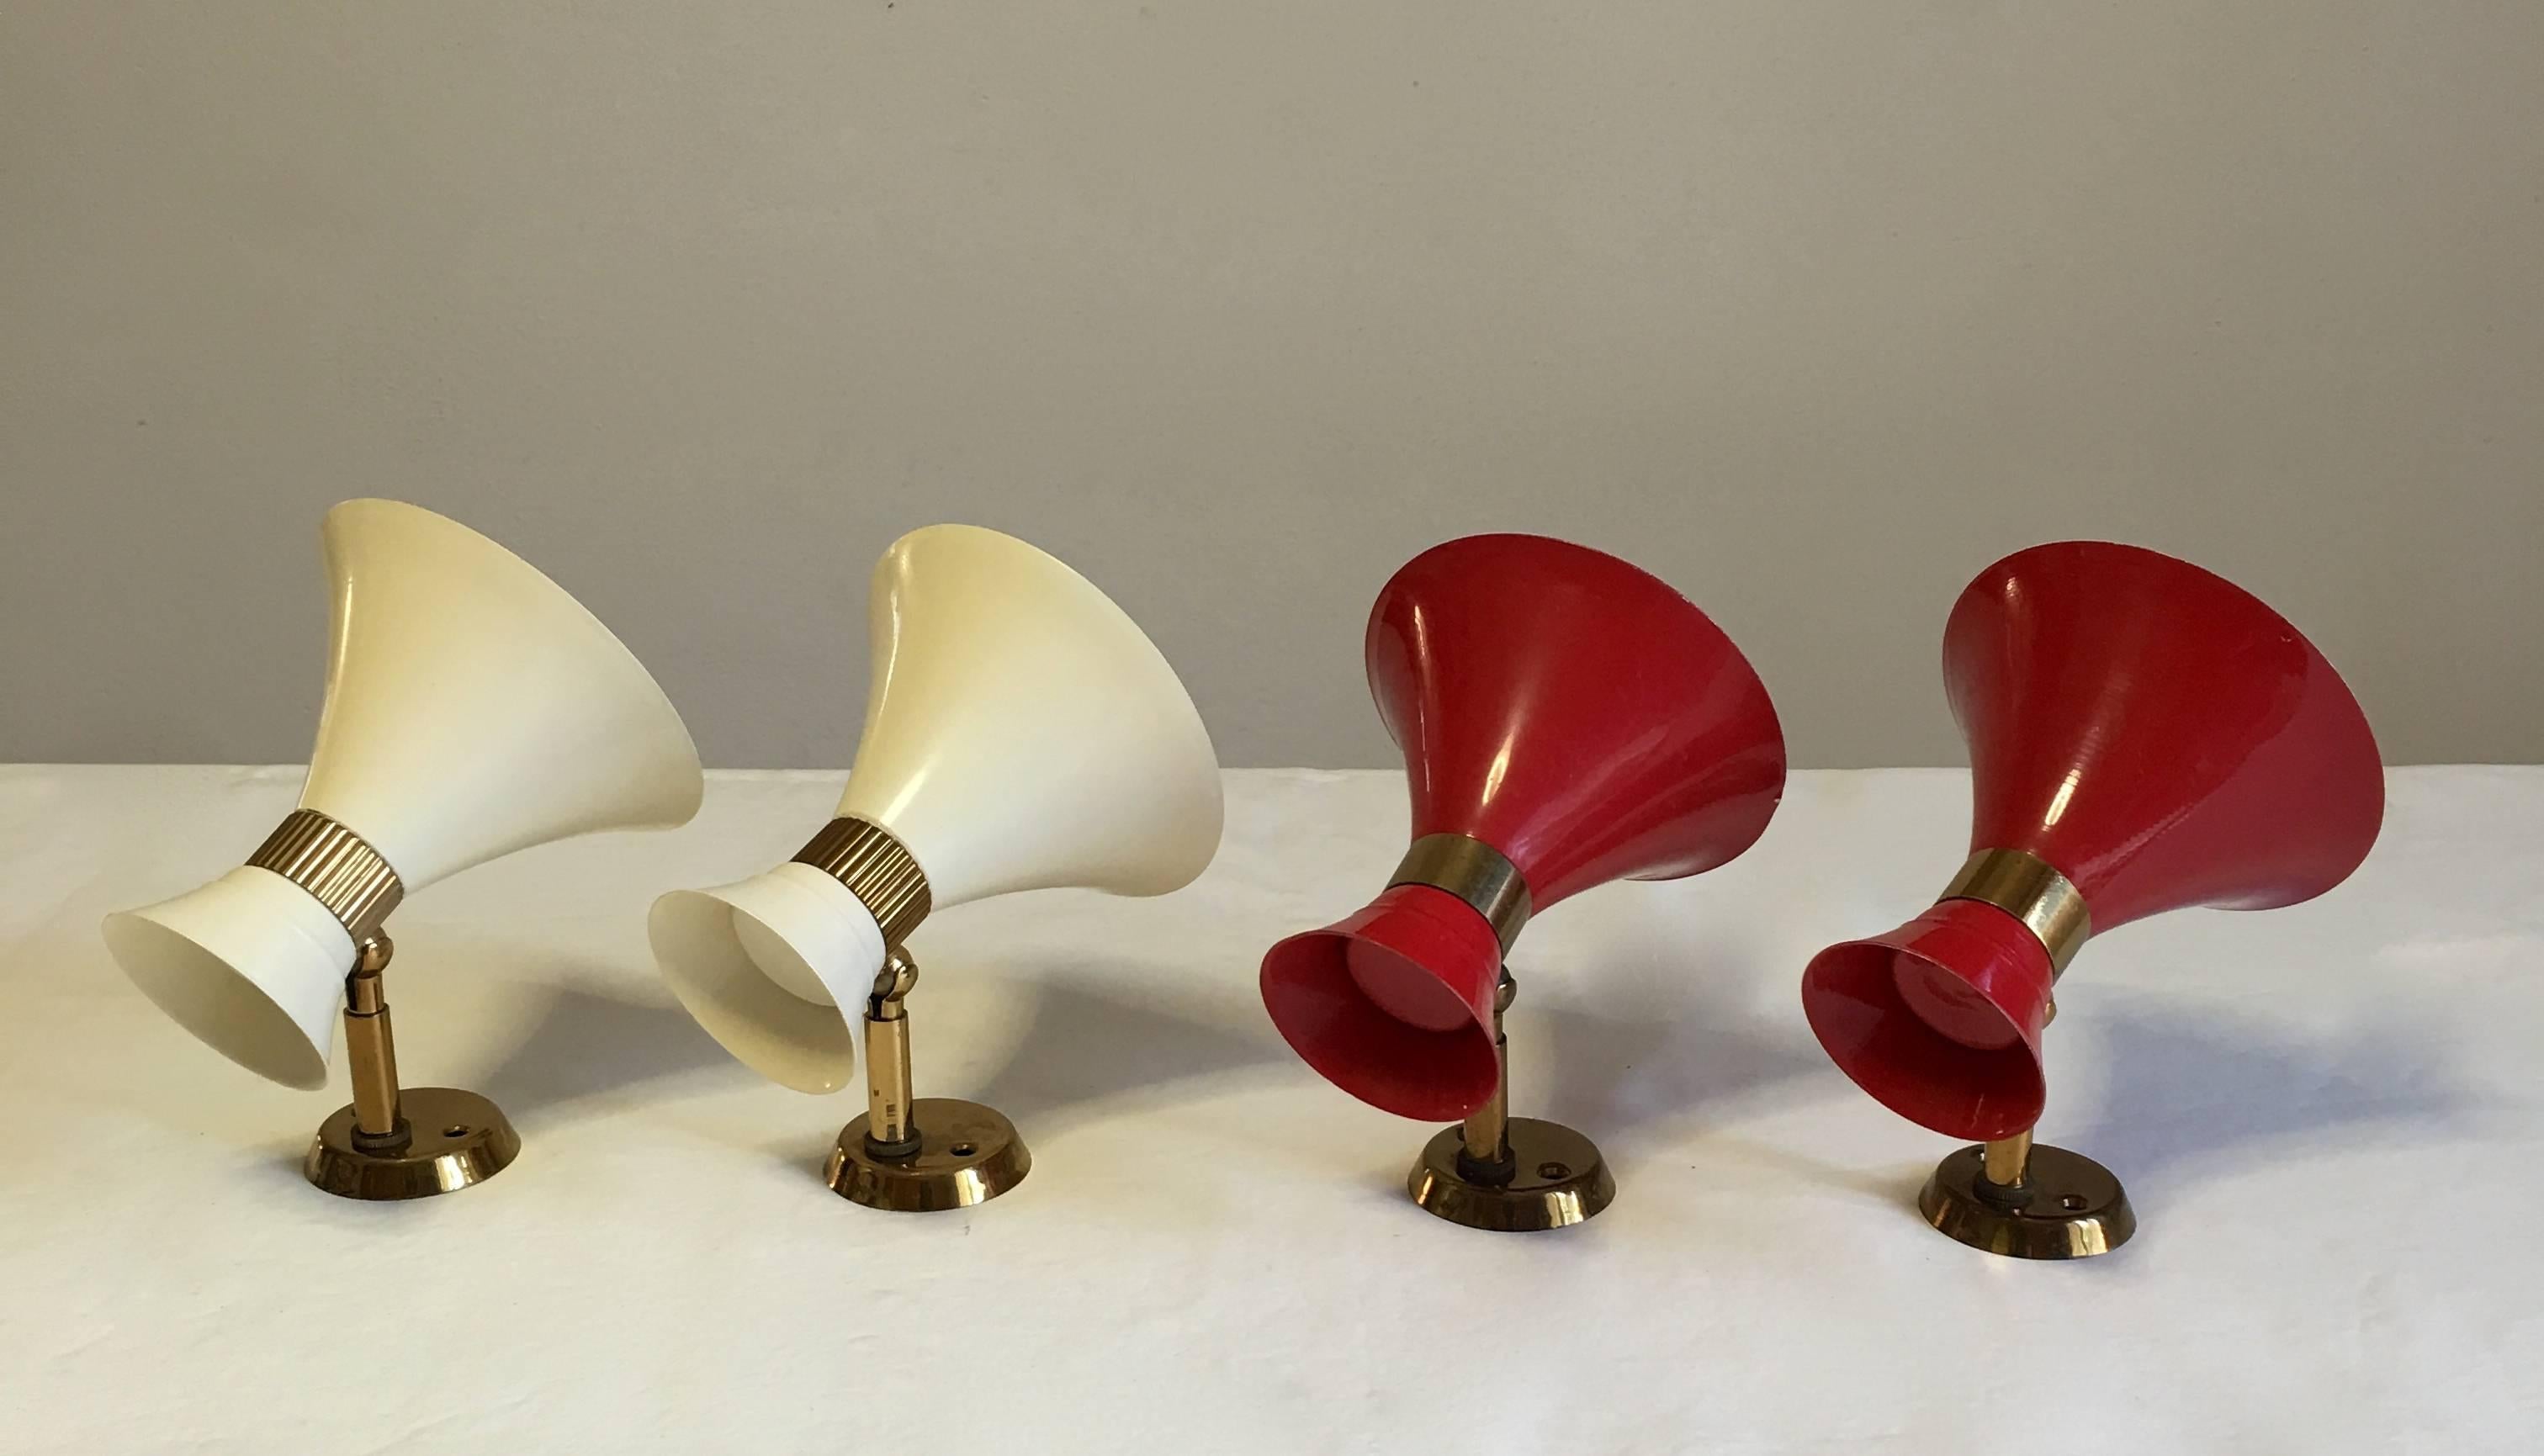 Brass and painted metal sconces in red and white, adjustable in several angles and beautiful details. Rewired.